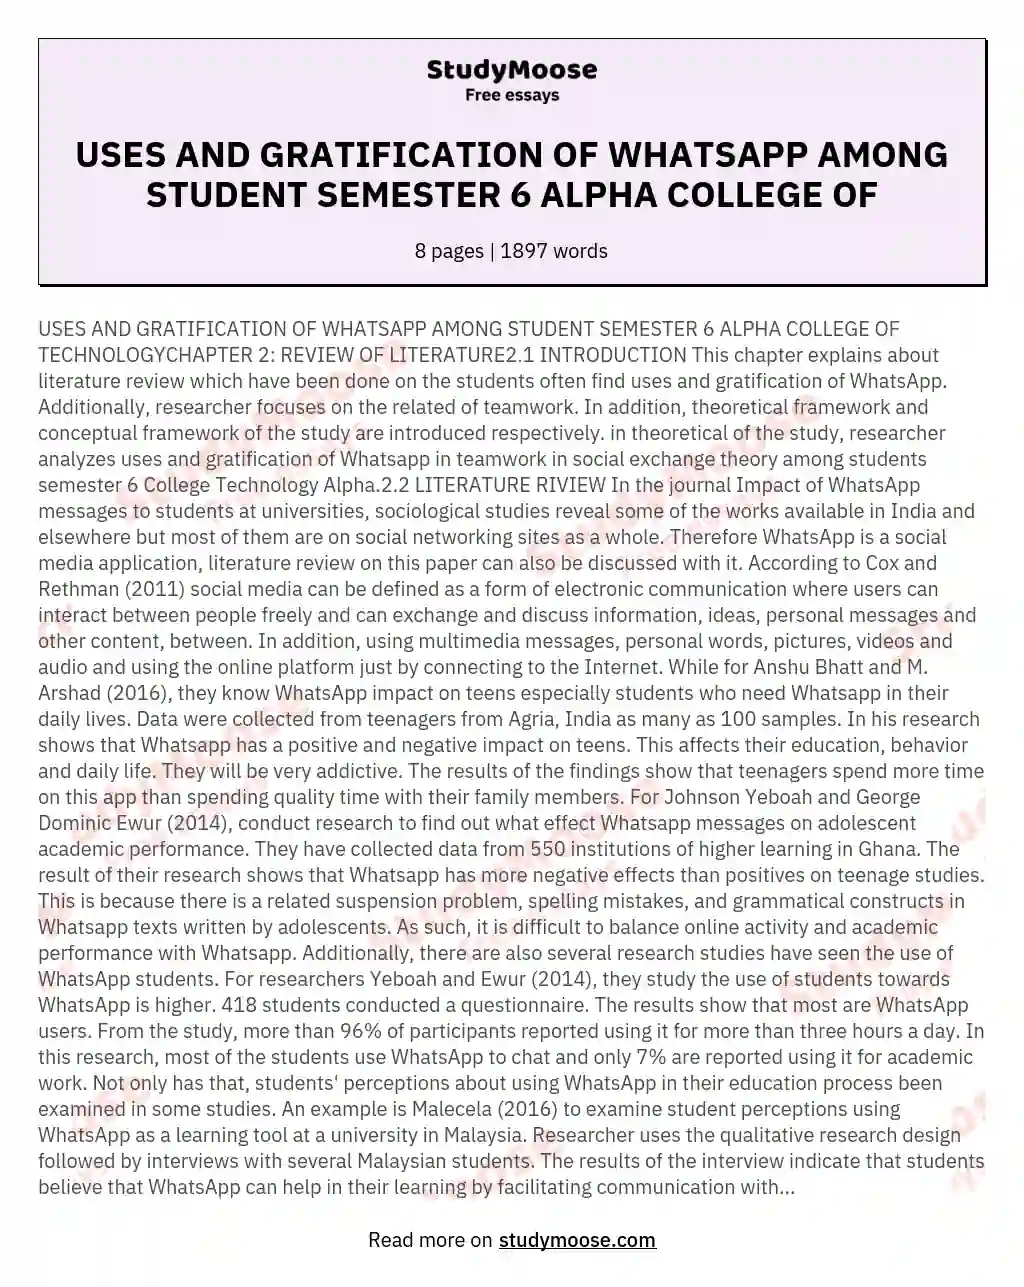 USES AND GRATIFICATION OF WHATSAPP AMONG STUDENT SEMESTER 6 ALPHA COLLEGE OF